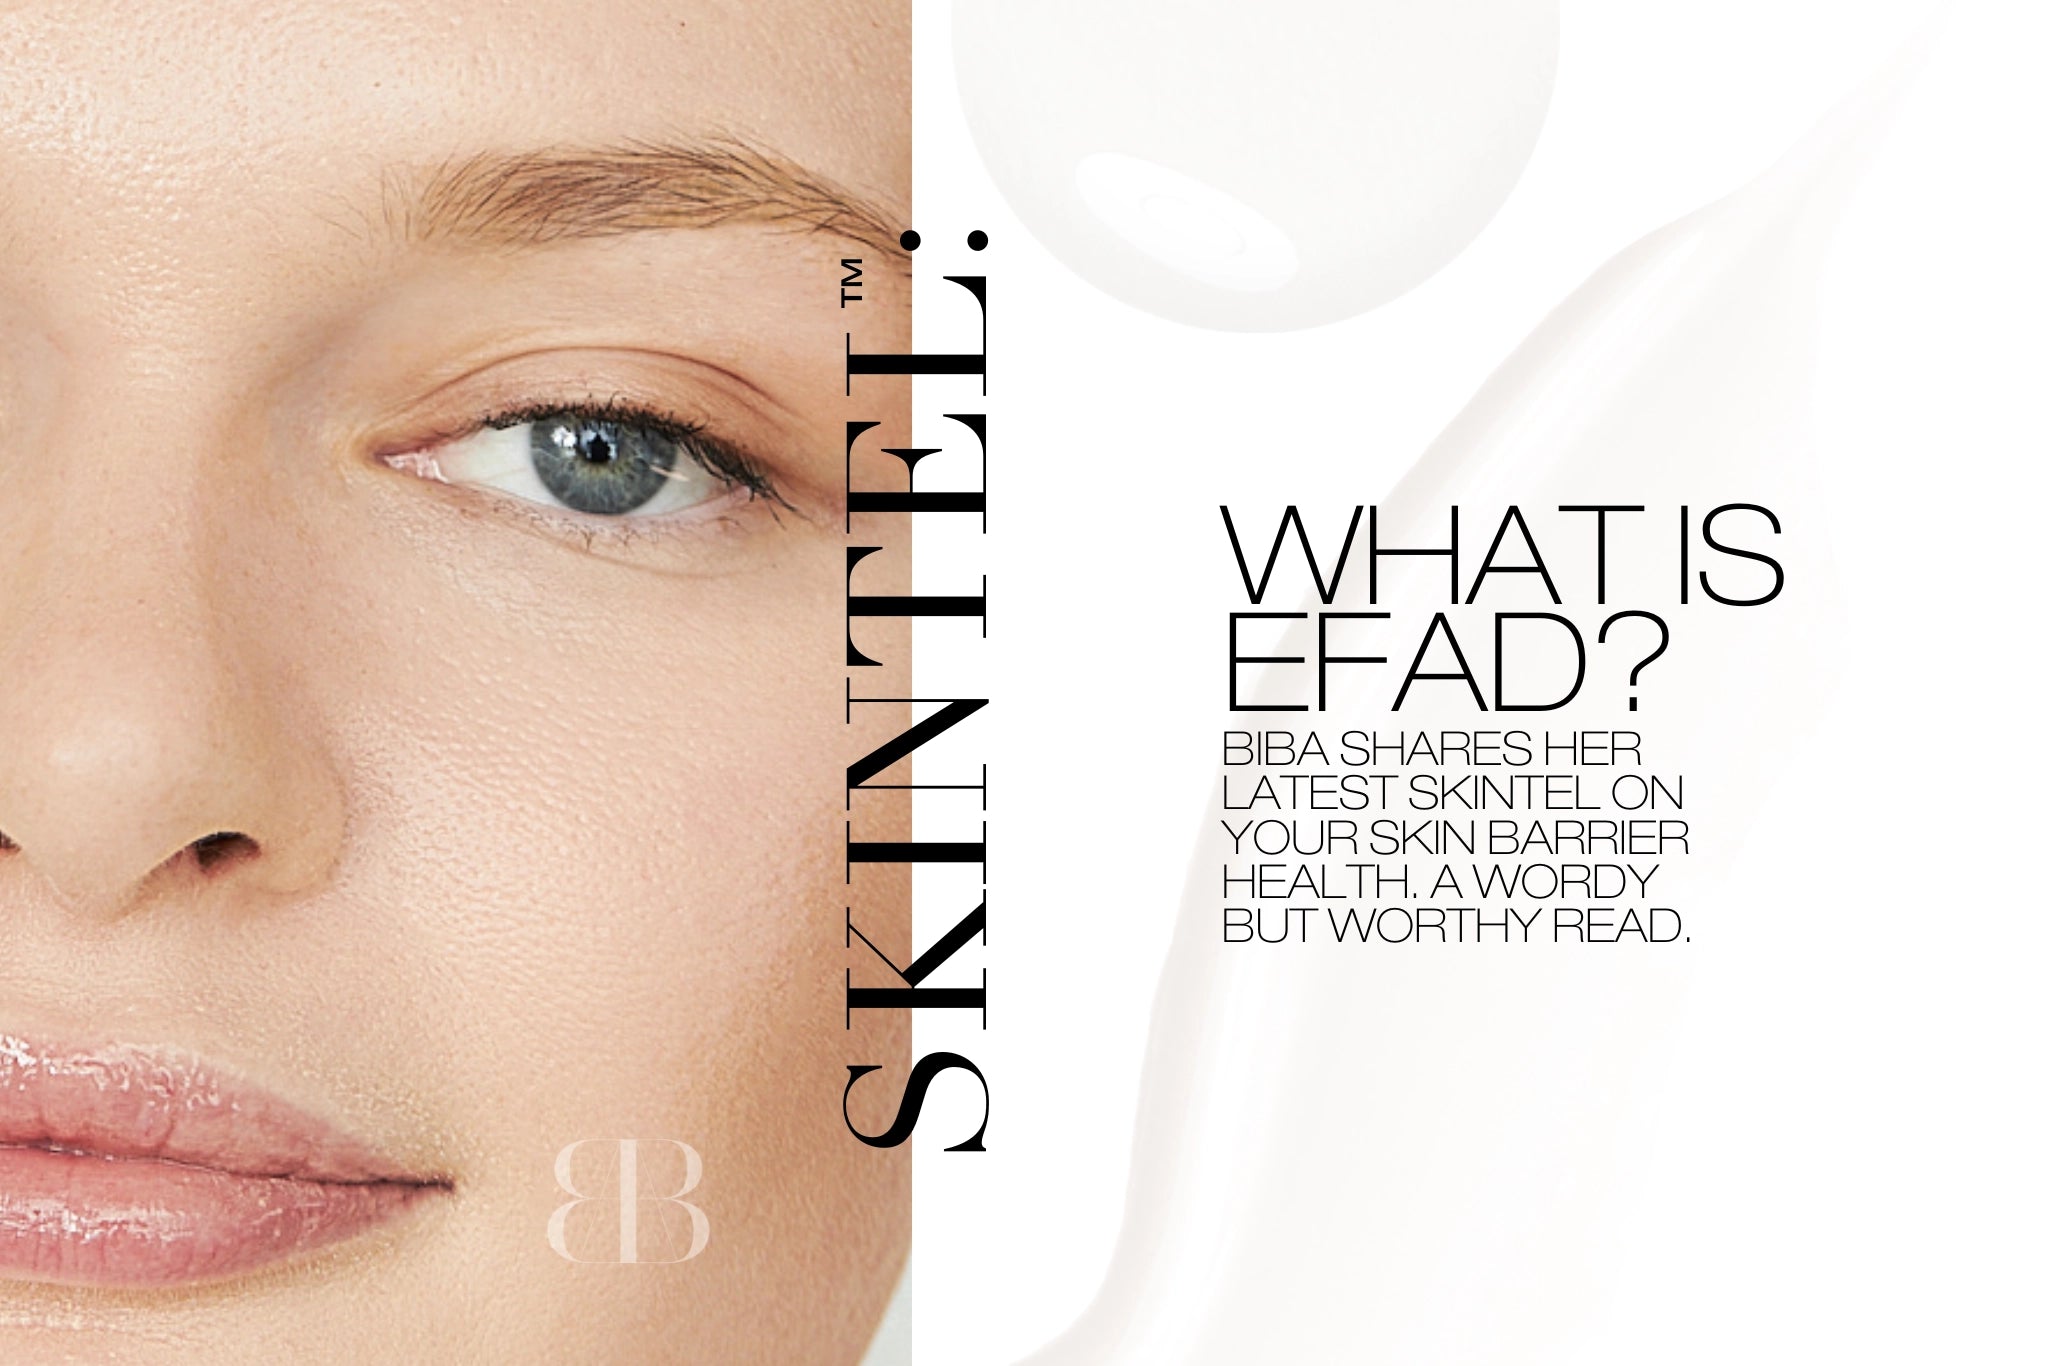 WHAT IS EFAD?